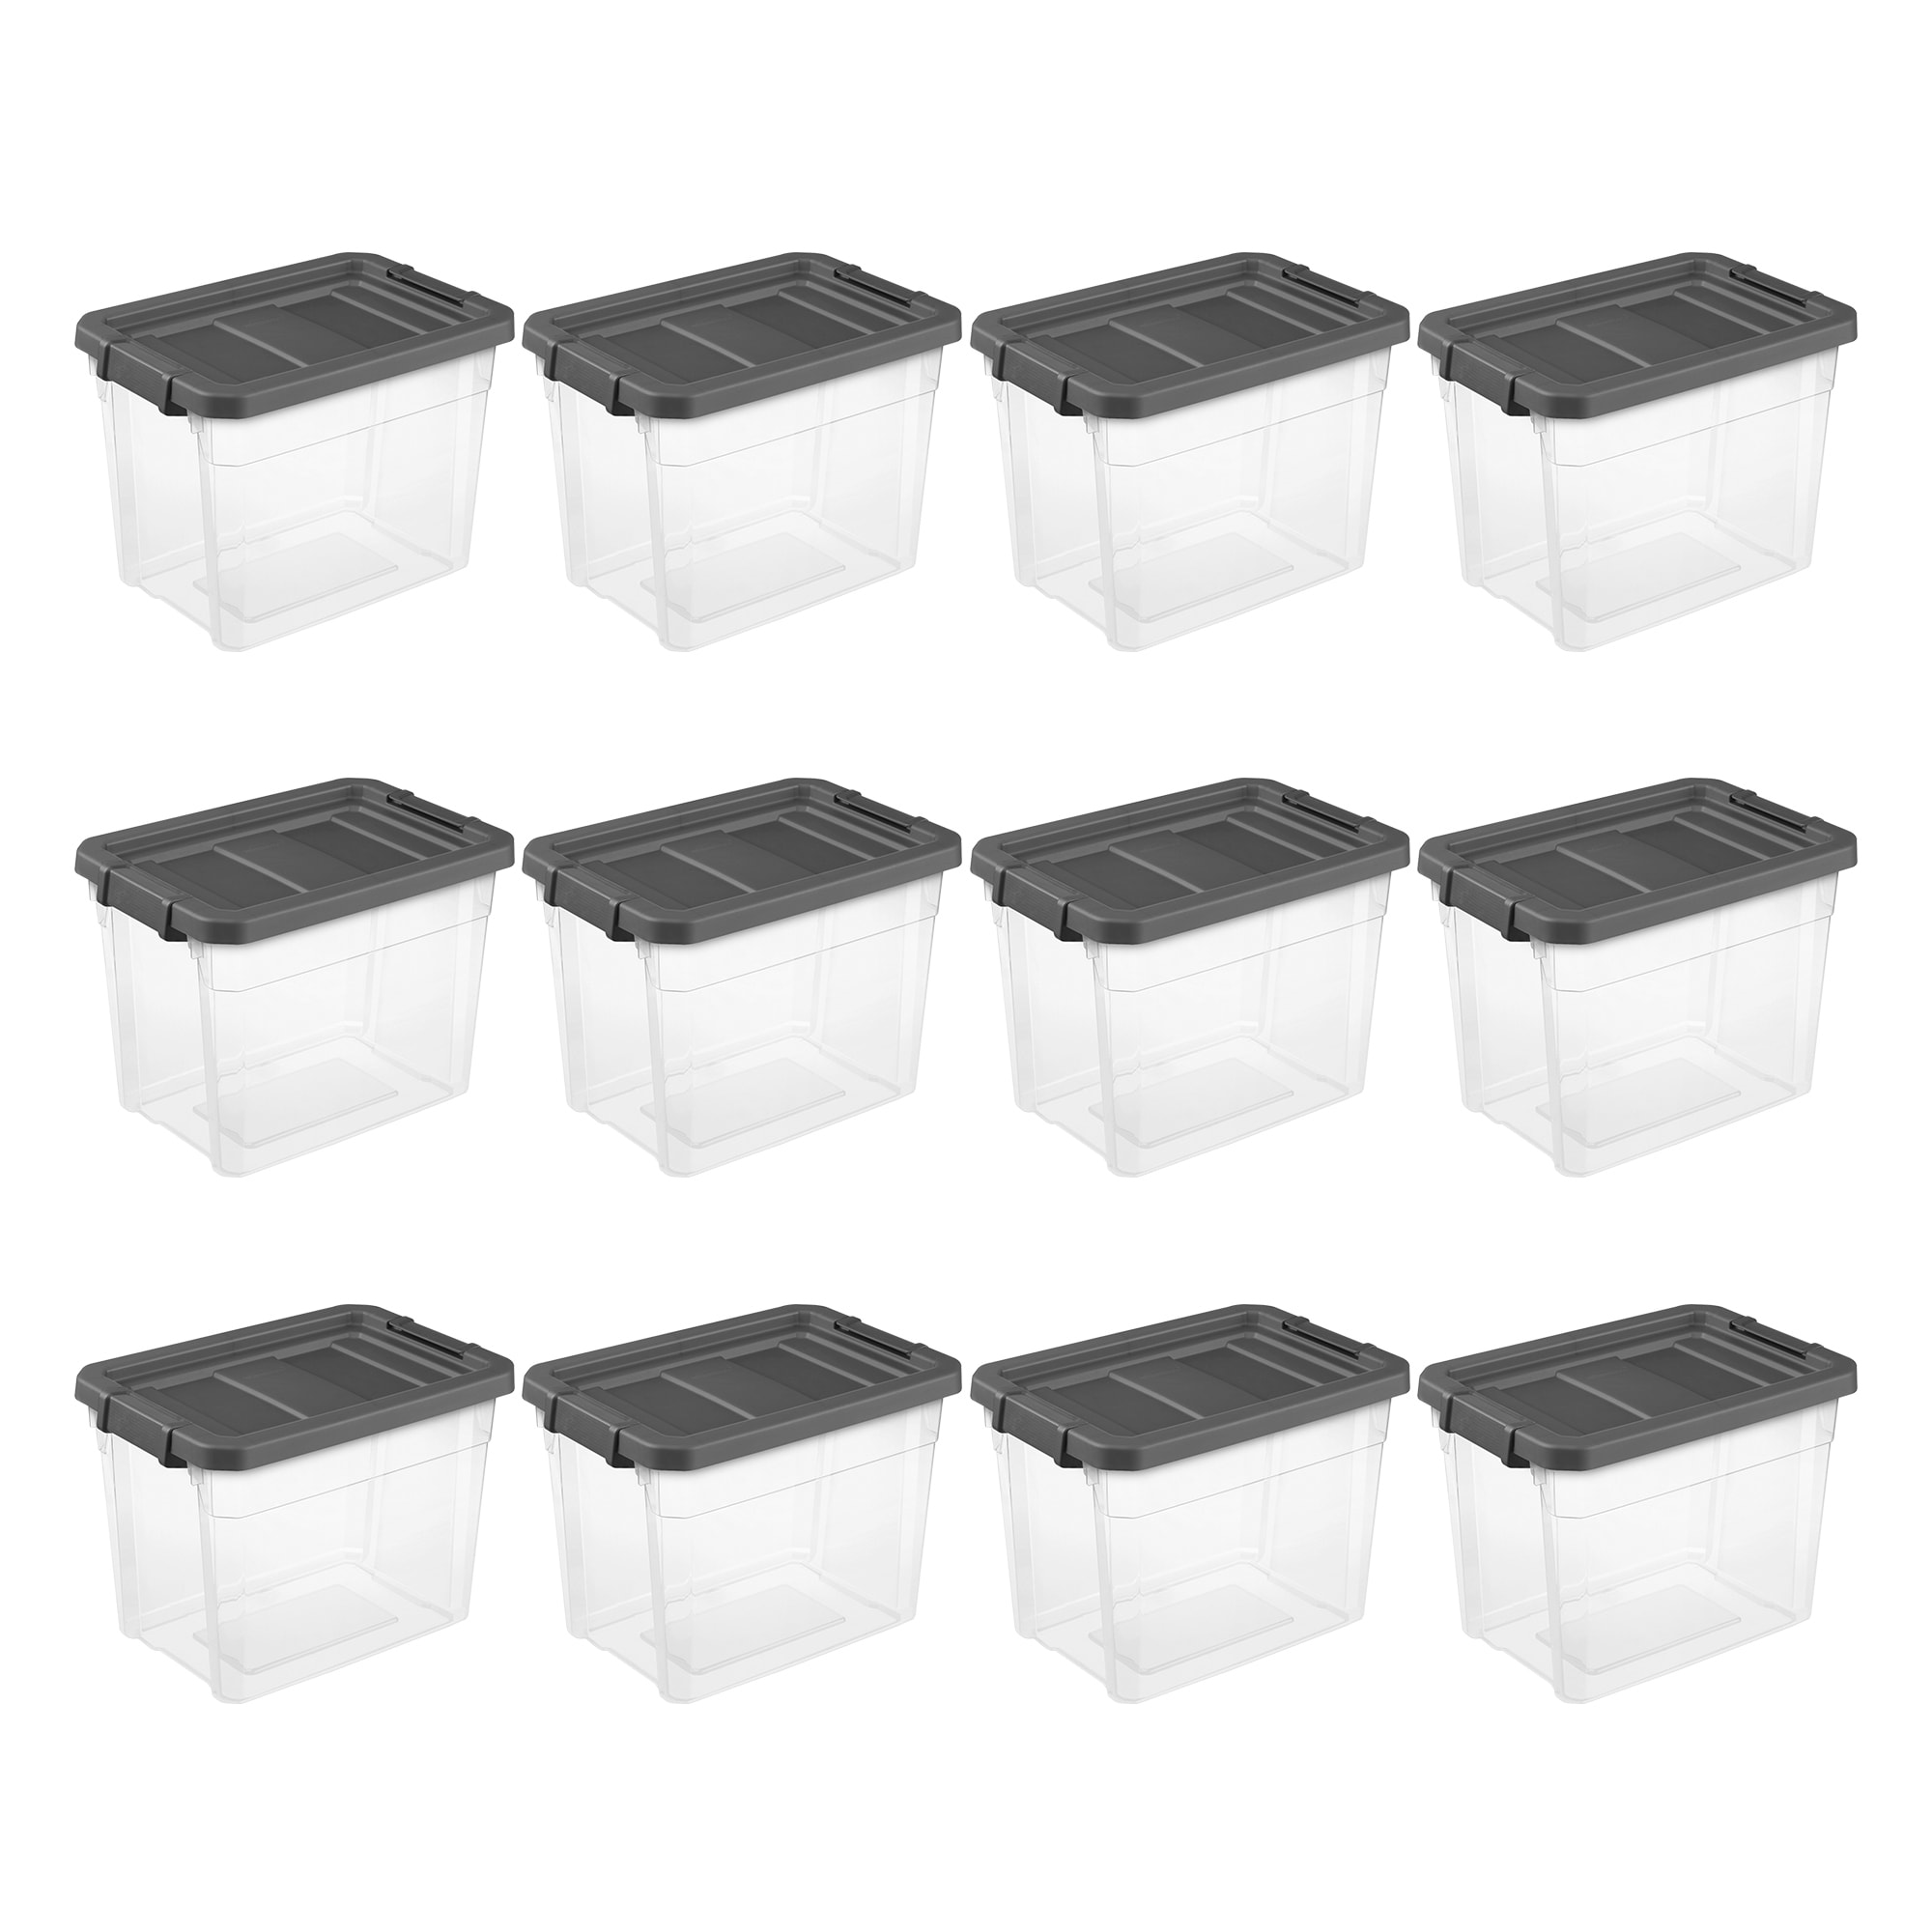 Sterilite 18 Gallon Plastic Storage Container Tote with Latching Lid (12 Pack)